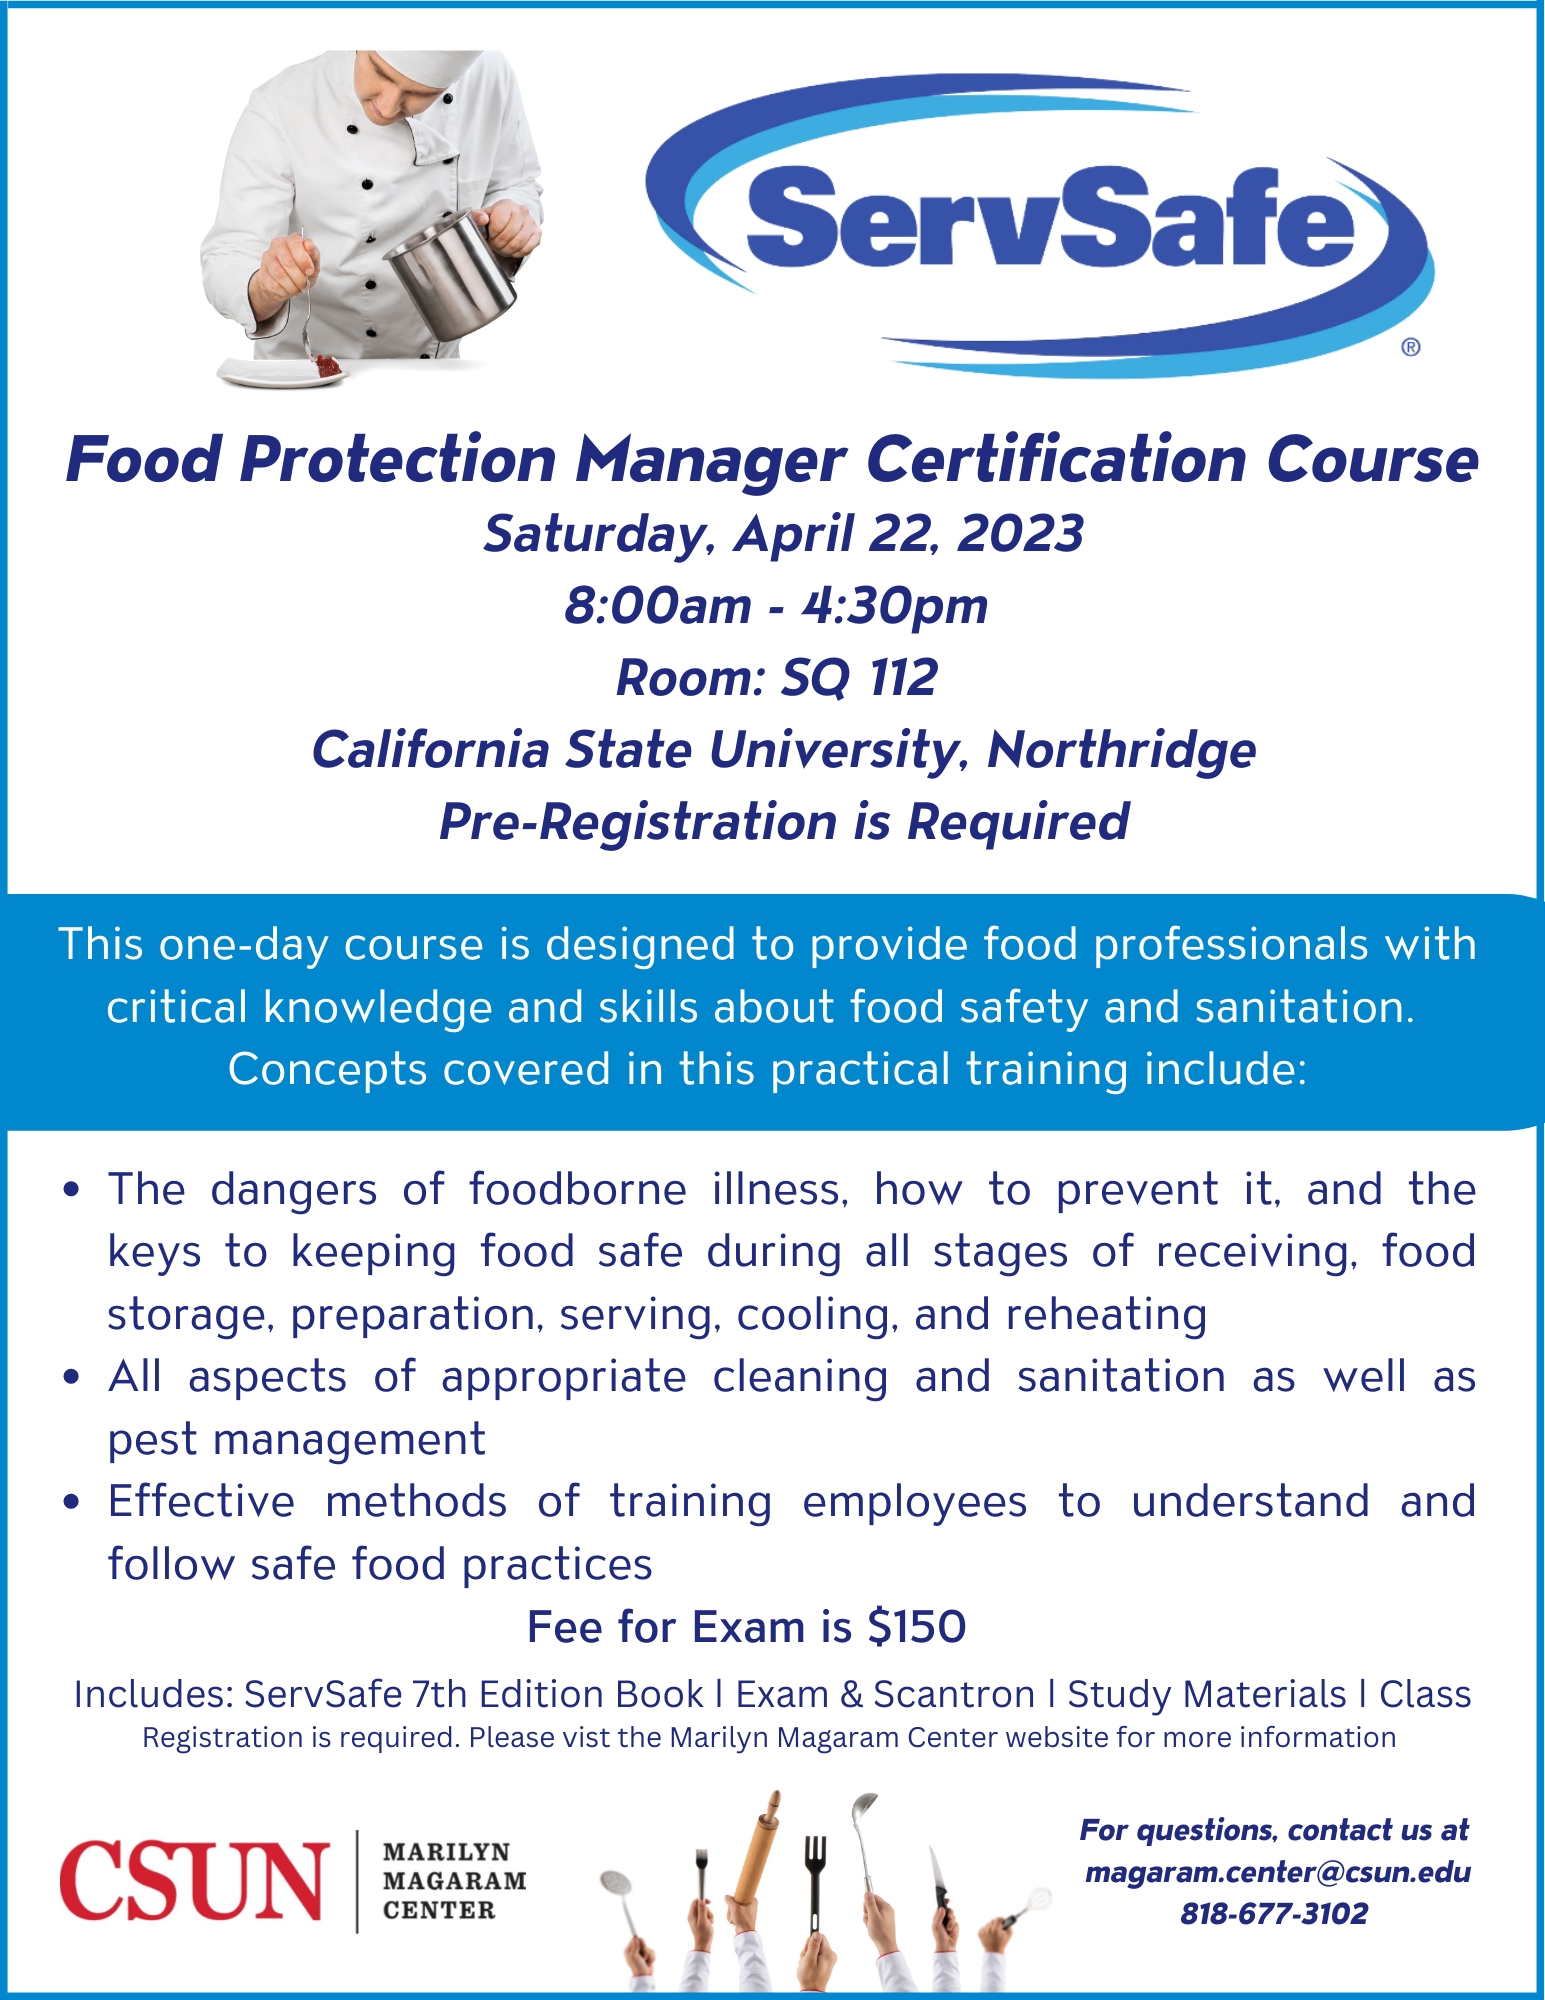 ServSafe: Food Protection Manager Certification Course California